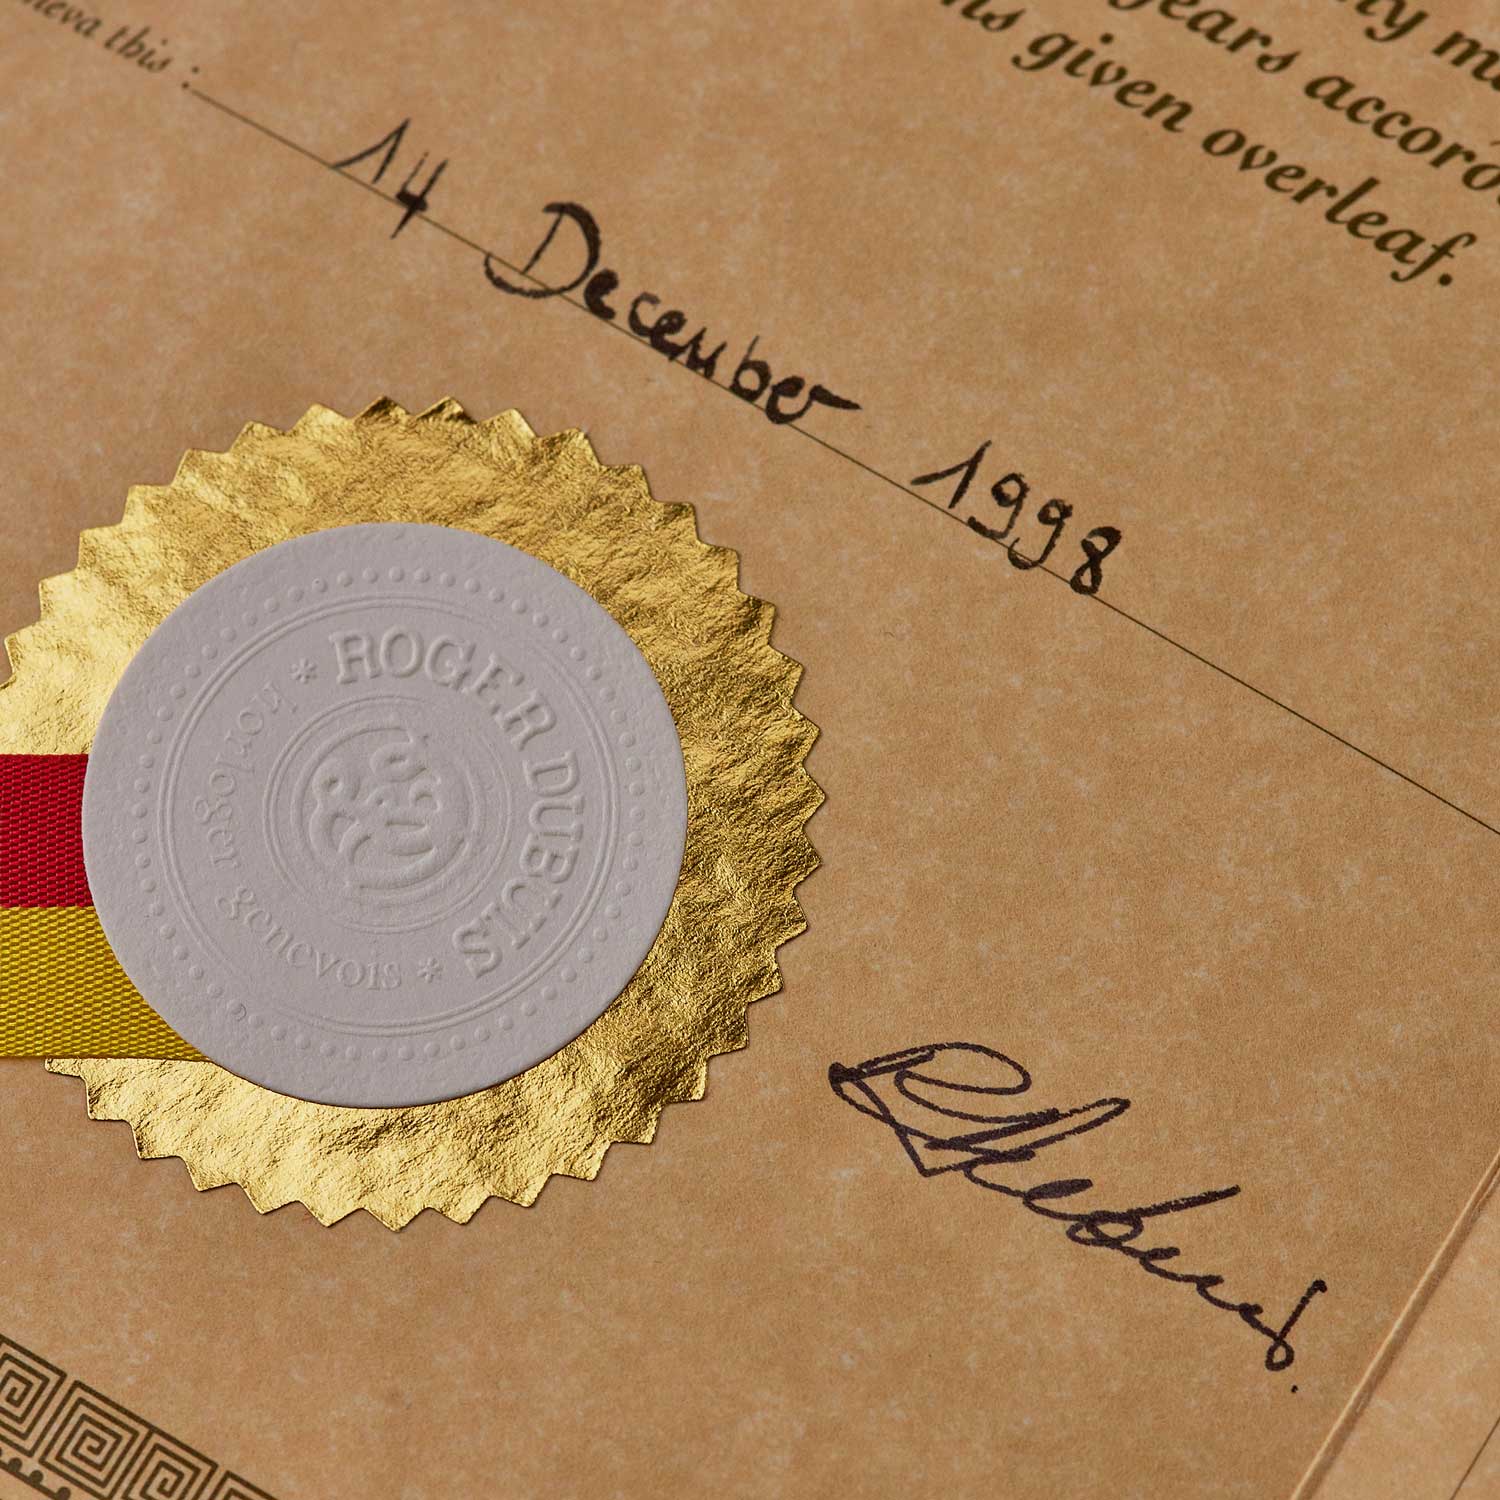 A very early Certificate of Origin and Guarantee from 1998, with Roger Dubuis’ signature on the Certificate of Origin and Guarantee